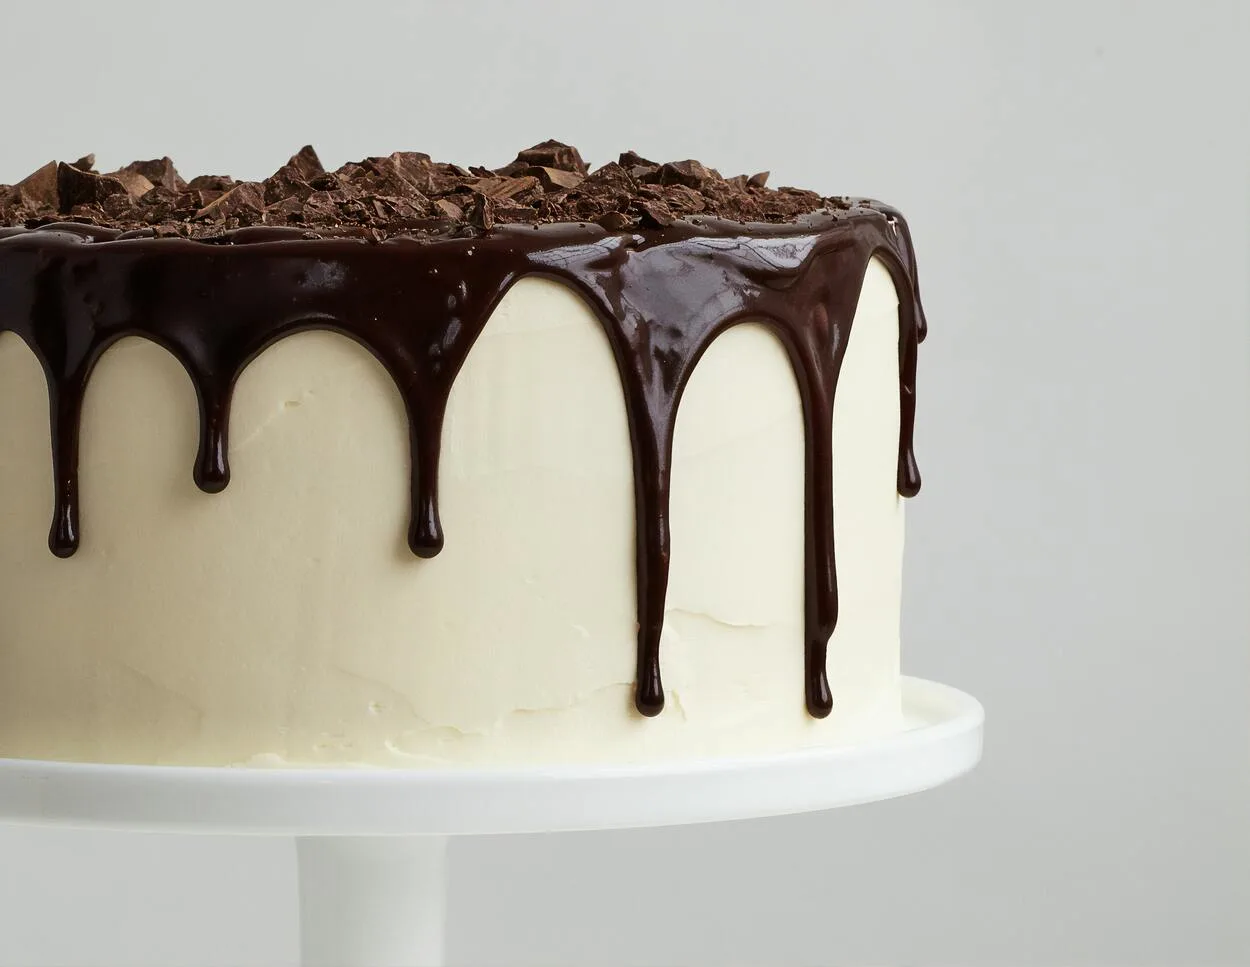 Vanilla cake with chocolate frosting. 